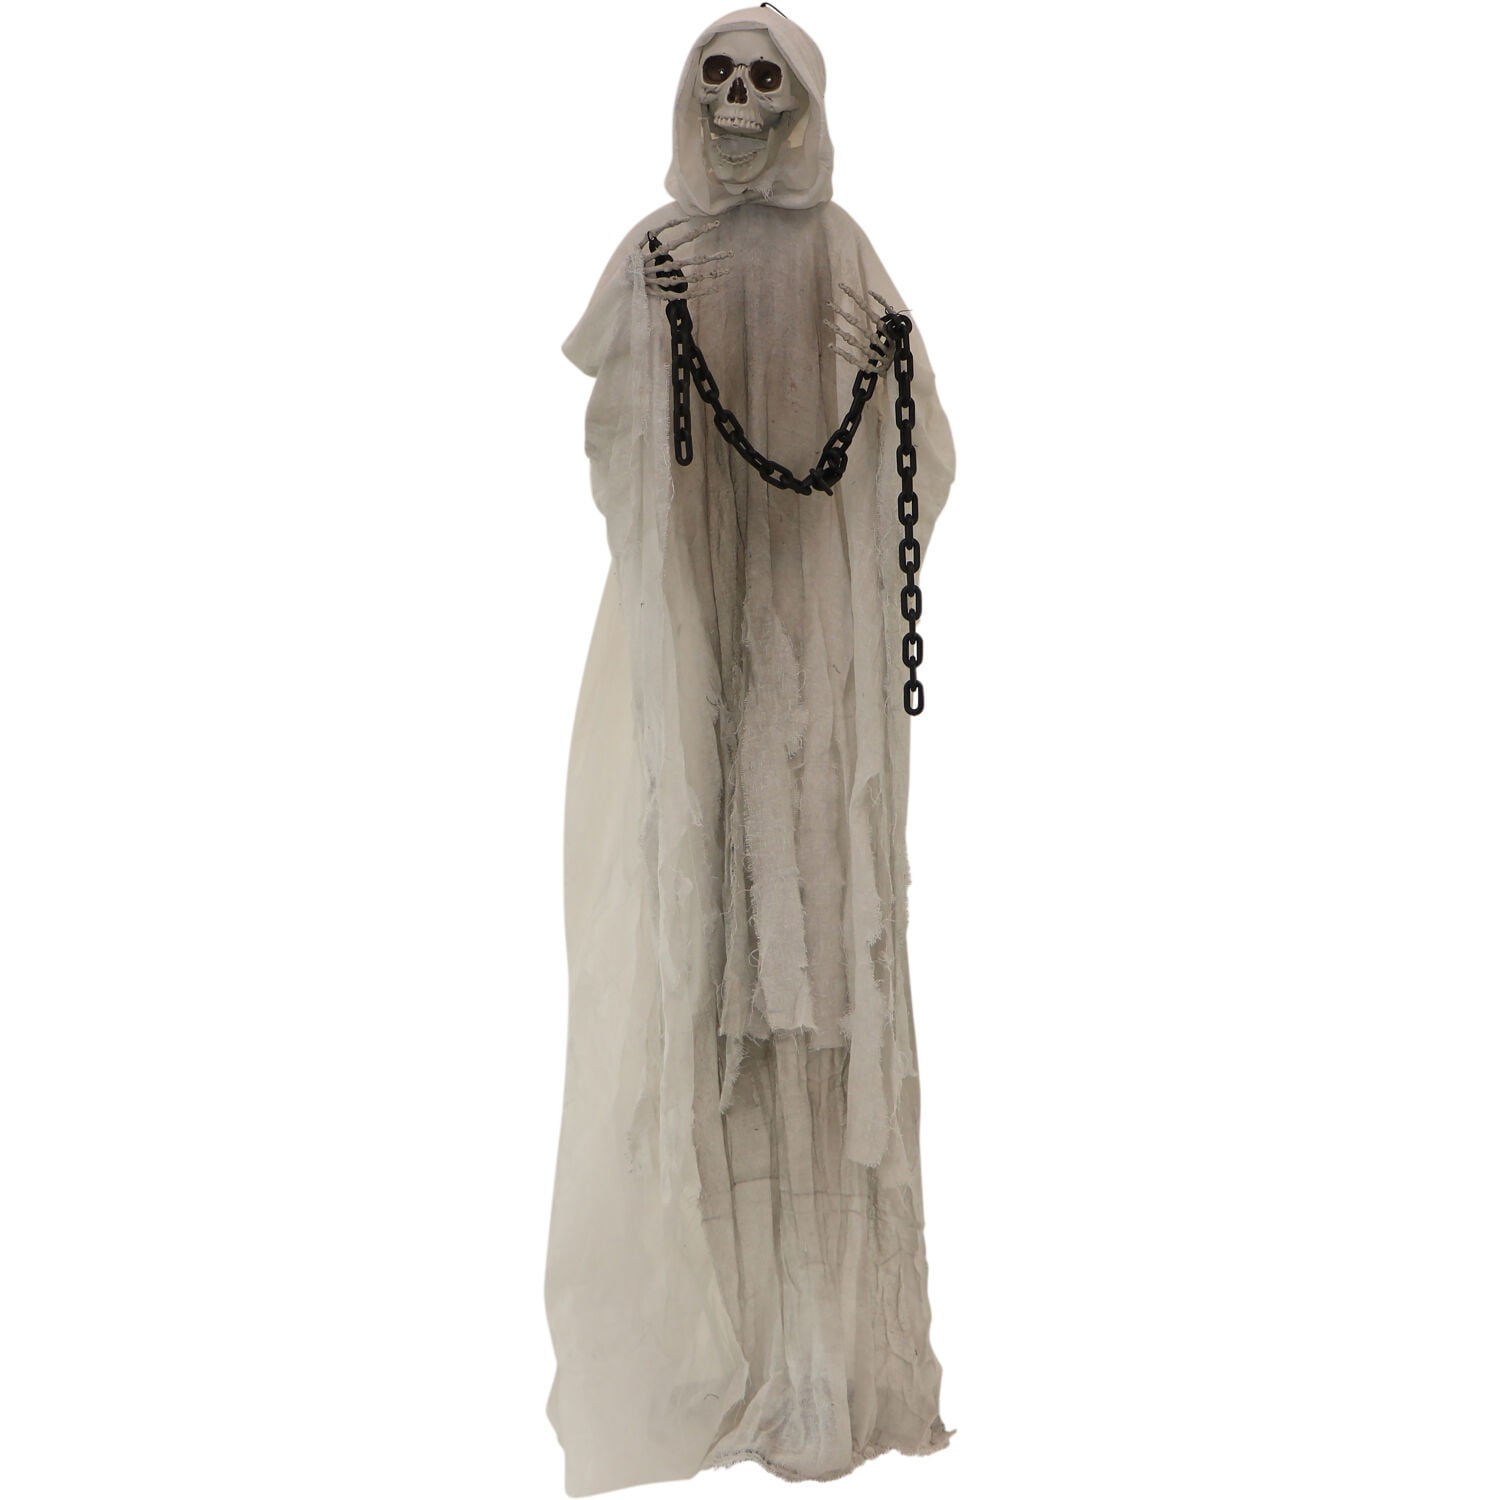 Hanging Animated Angel Of Death Light Up Reaper Tattered Cloak Halloween Prop 